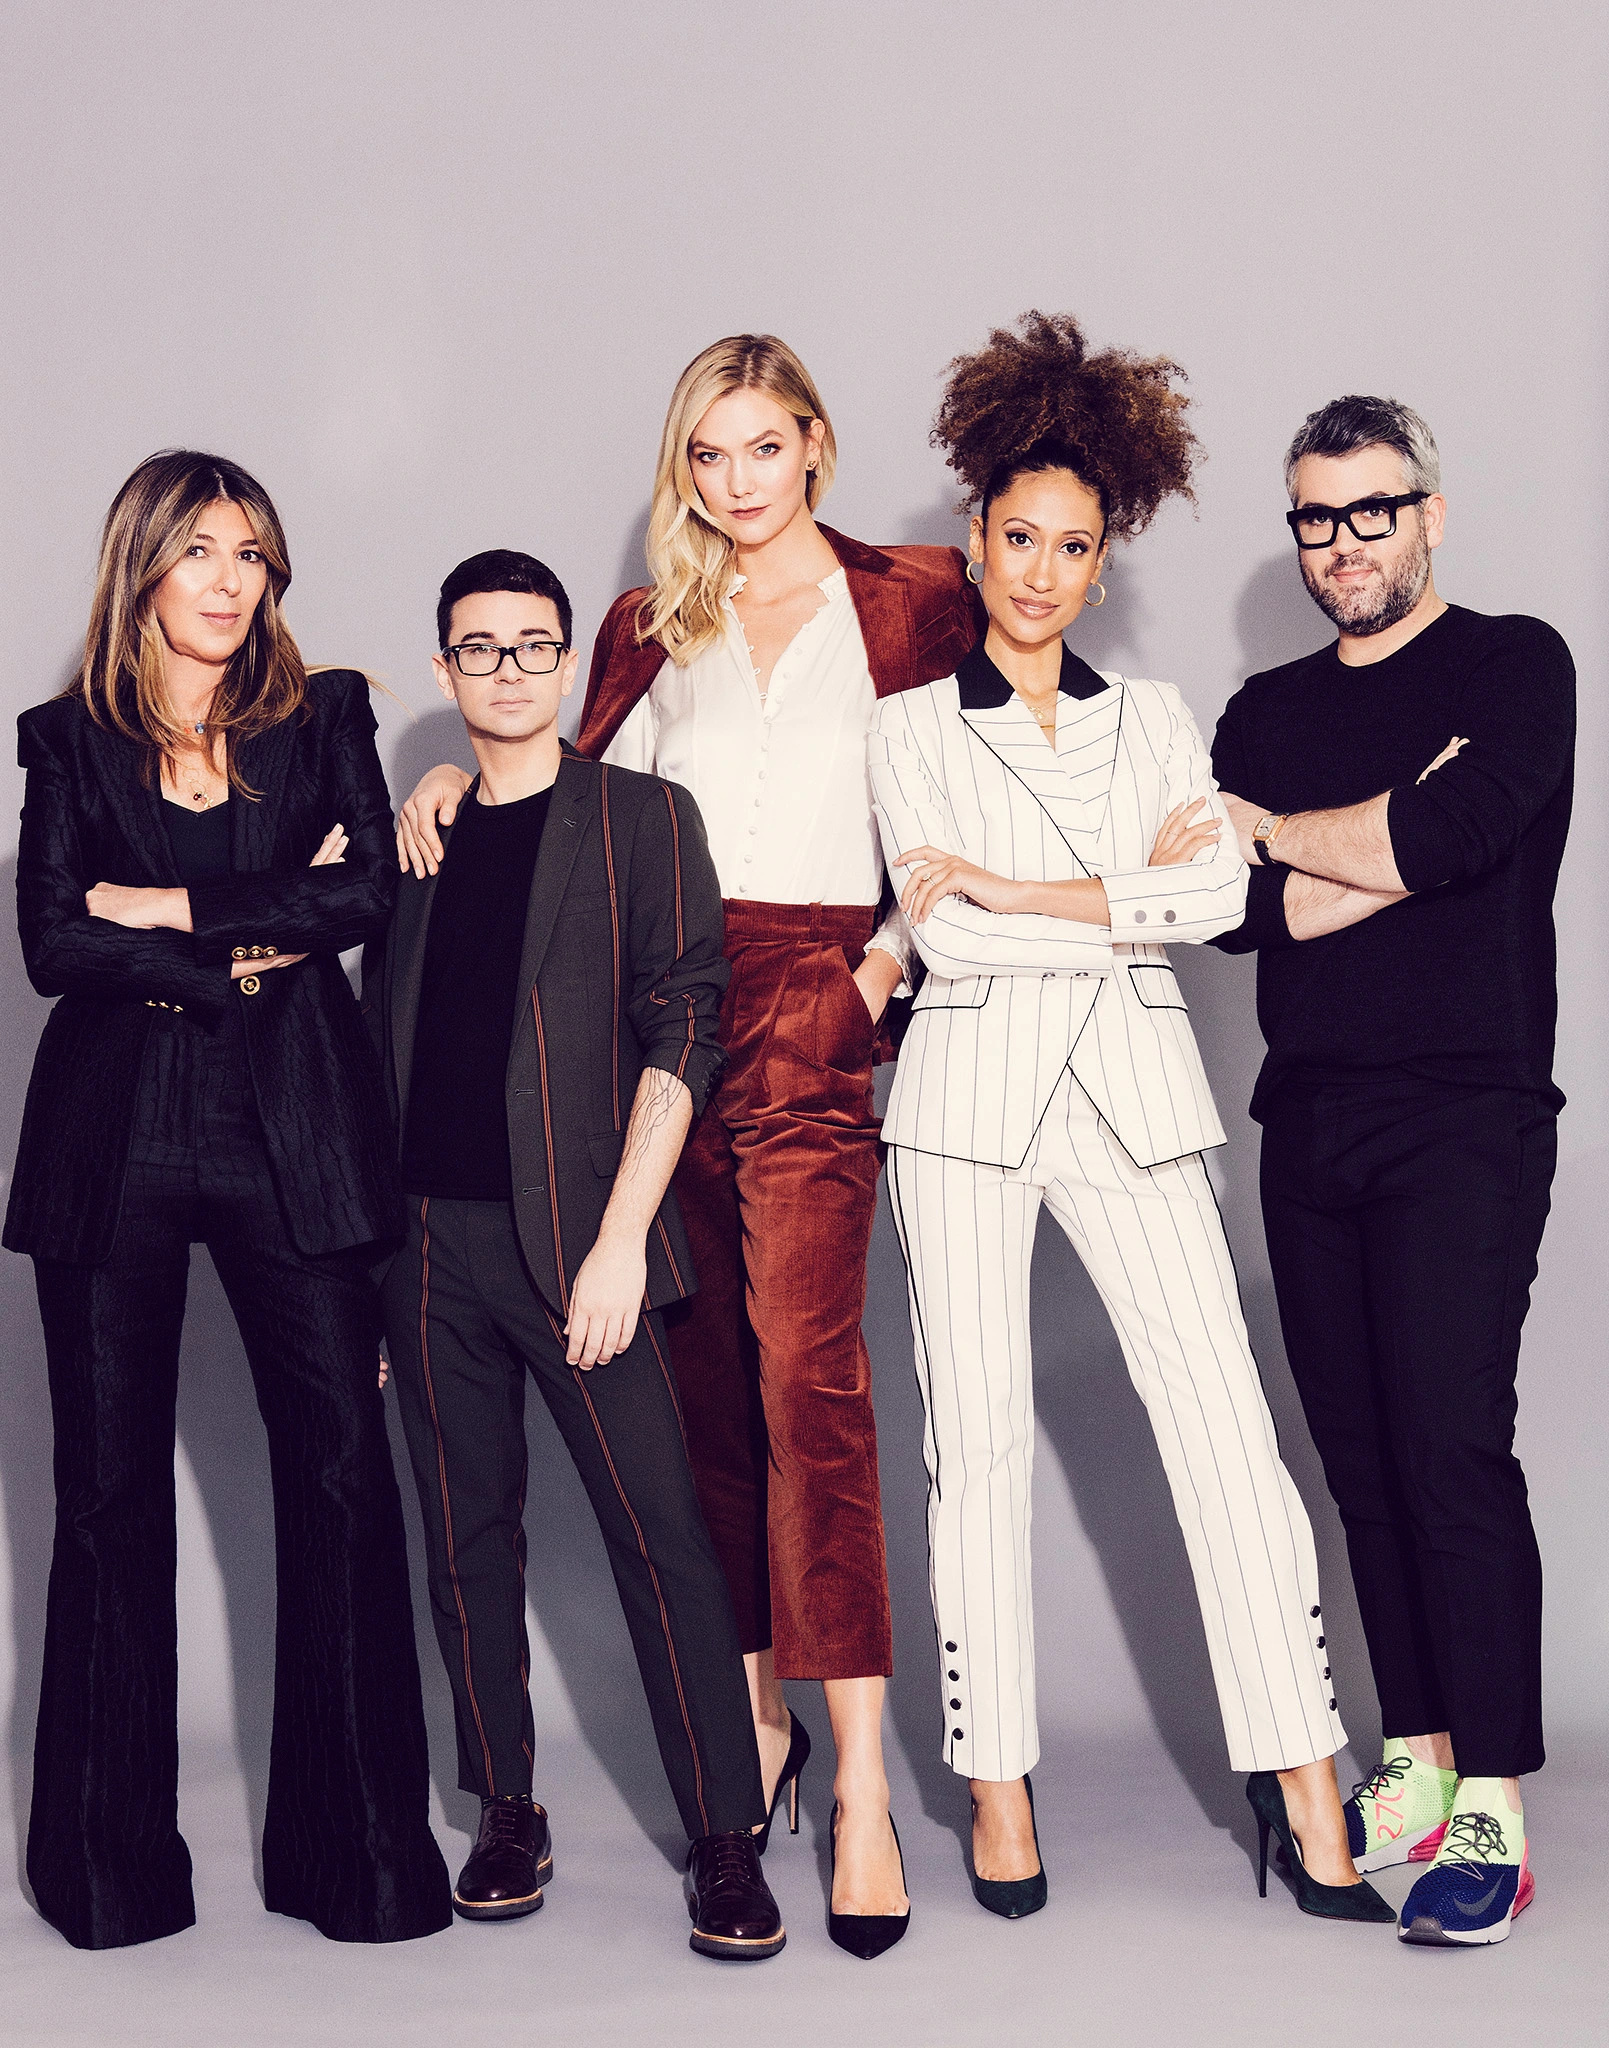 HD wallpaper, Tv Shows, Tv Guide, 1610X2050 Hd Phone, Watch, Iphone Hd Project Runway Background Photo, Project Runway